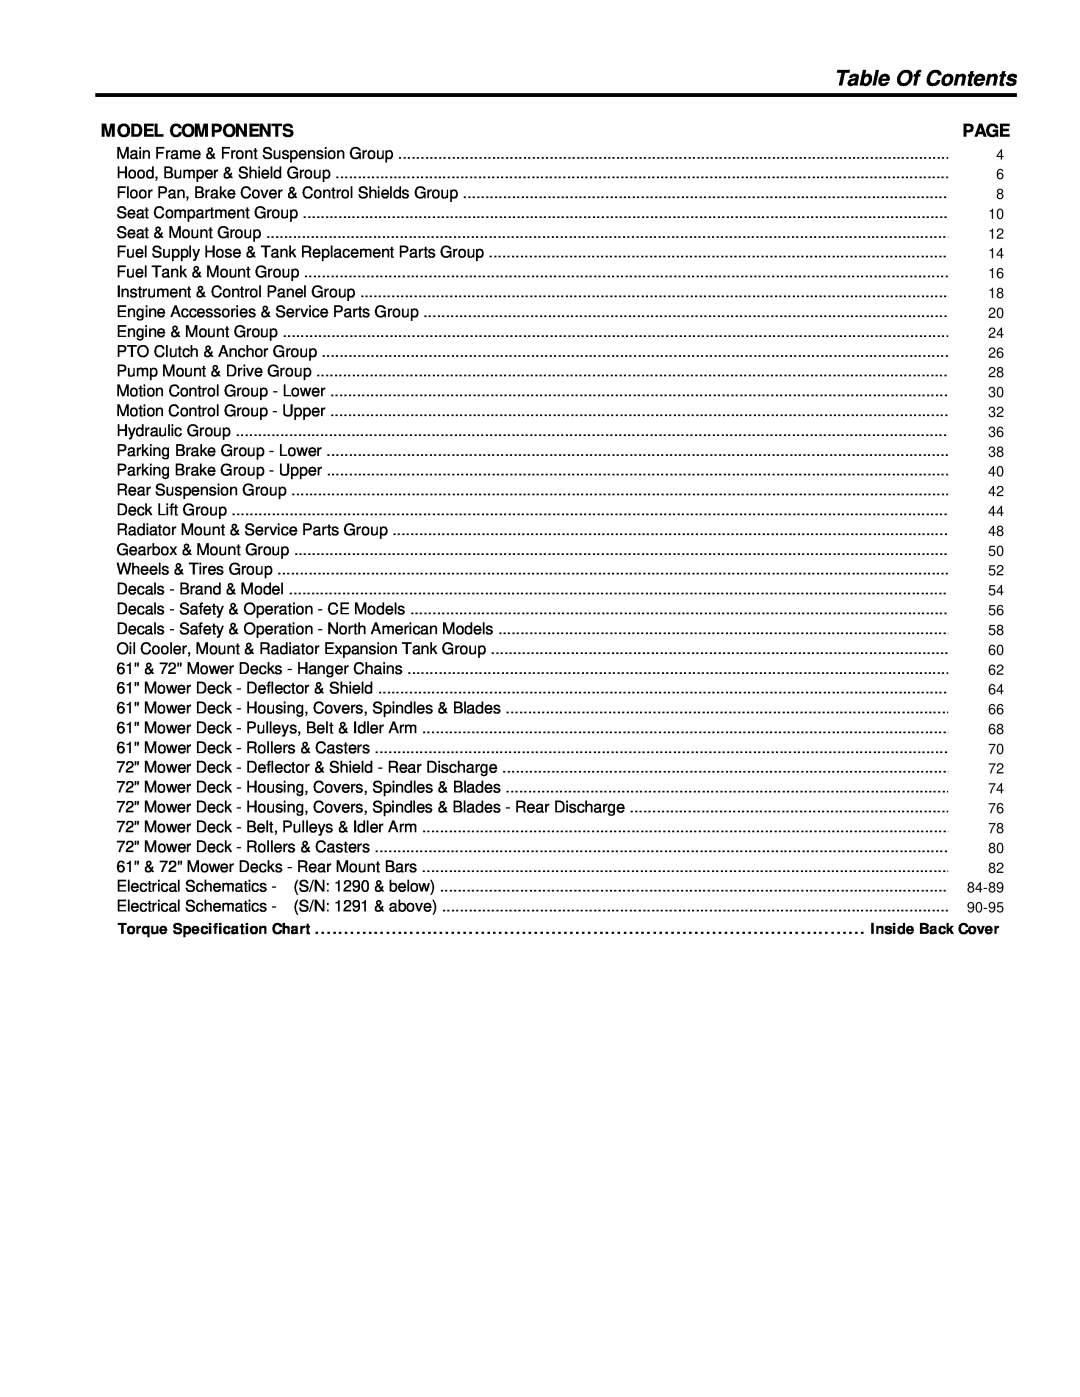 Briggs & Stratton 5900205, 5901070, 5901074, 5901071 Table Of Contents, Model Components, Page, Torque Specification Chart 